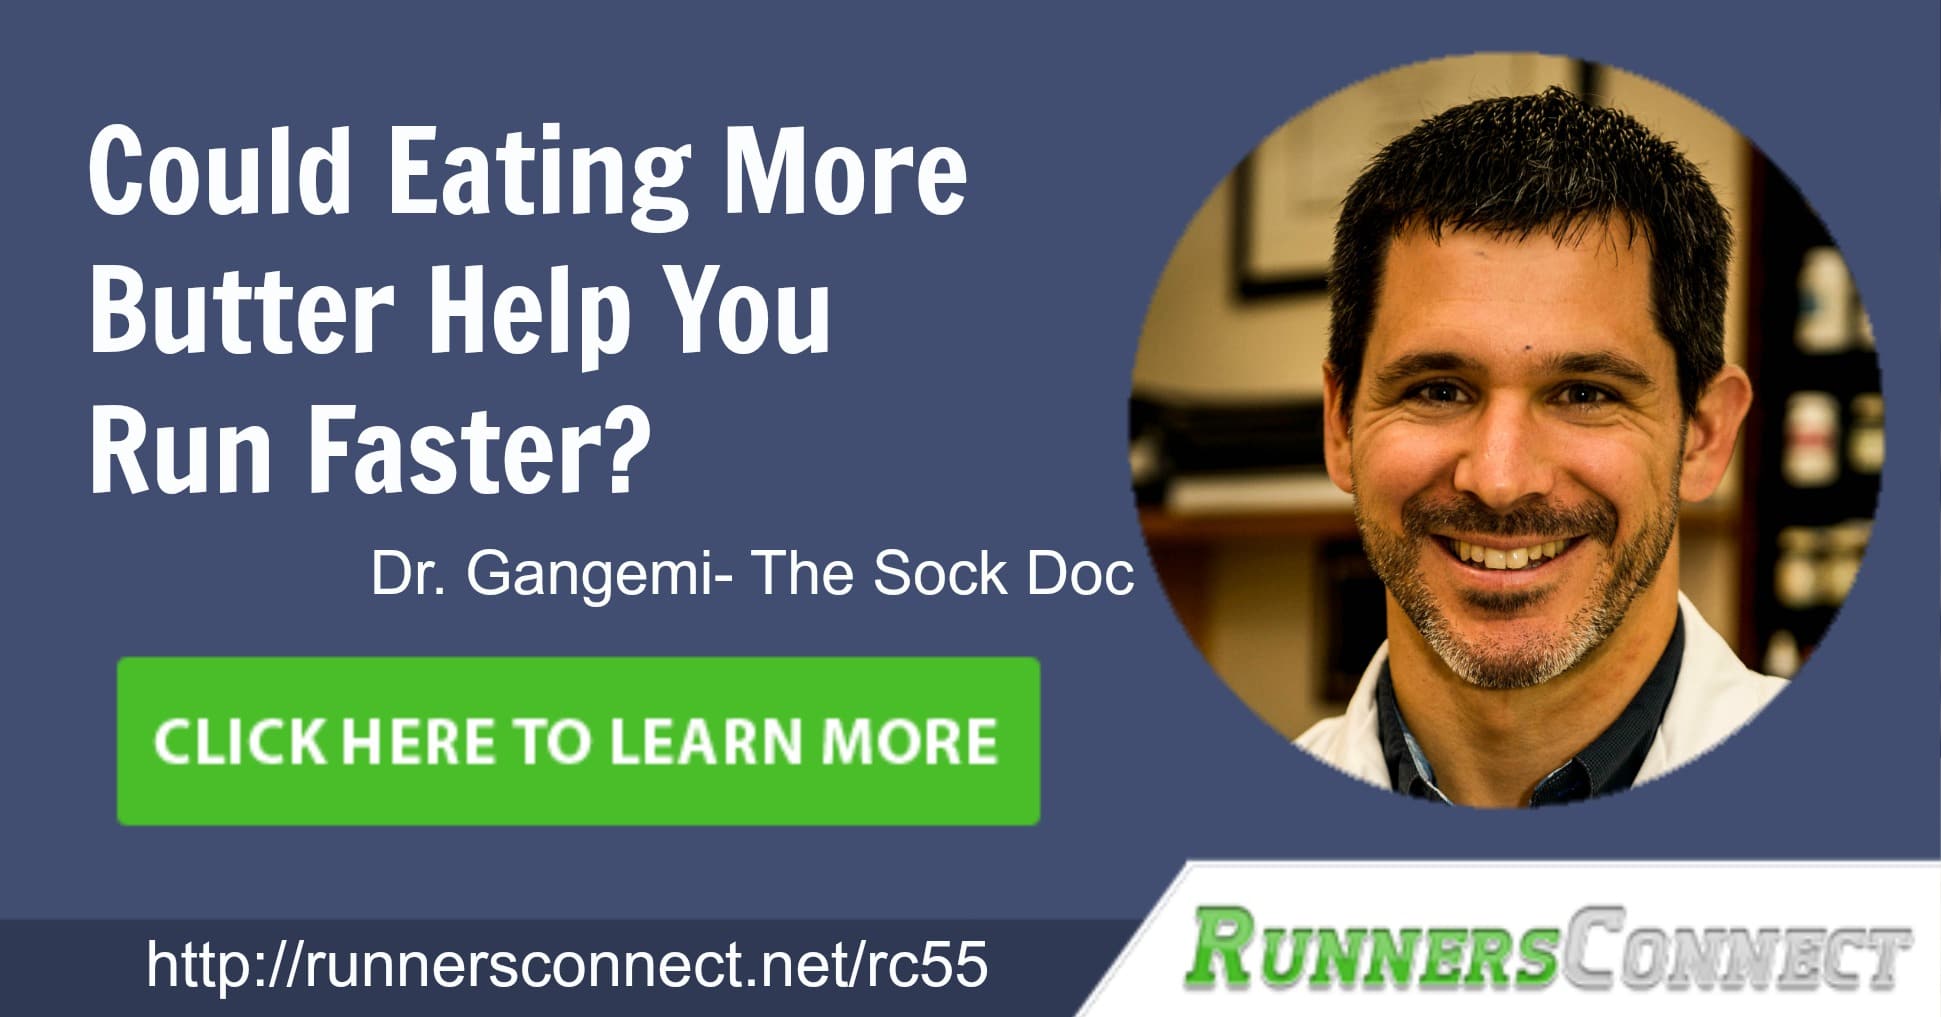 If you are fed up of the aches and pains that regularly arise as a runner, this interview with the Sock-Doc is just what you need. Dr Gangemi explains what you need to heal naturally, and stay injury free.